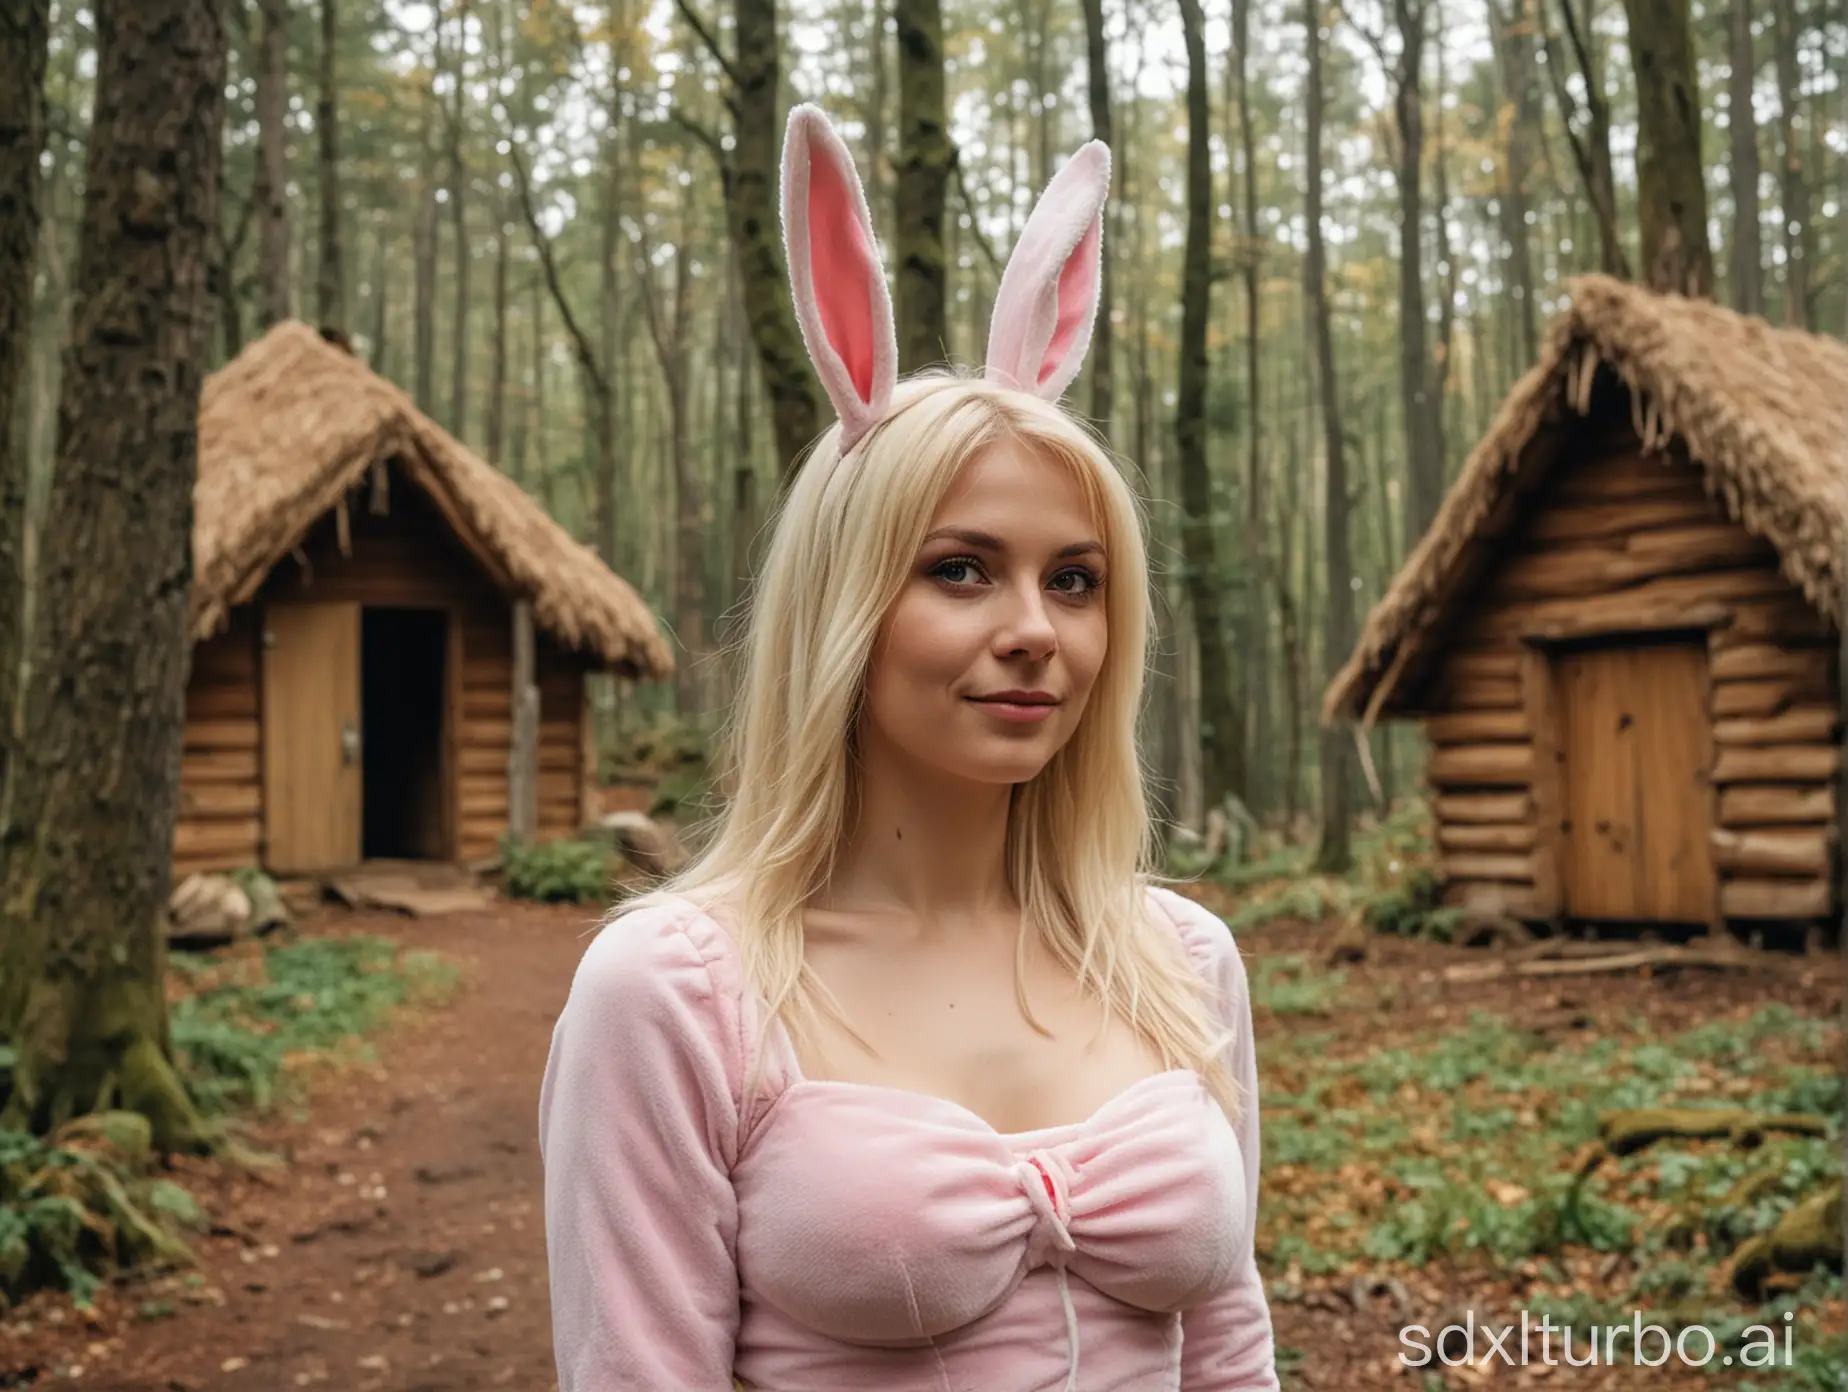 a Blonde woman is wearing a bunny costume. In the background, you can see a hut in the forest.